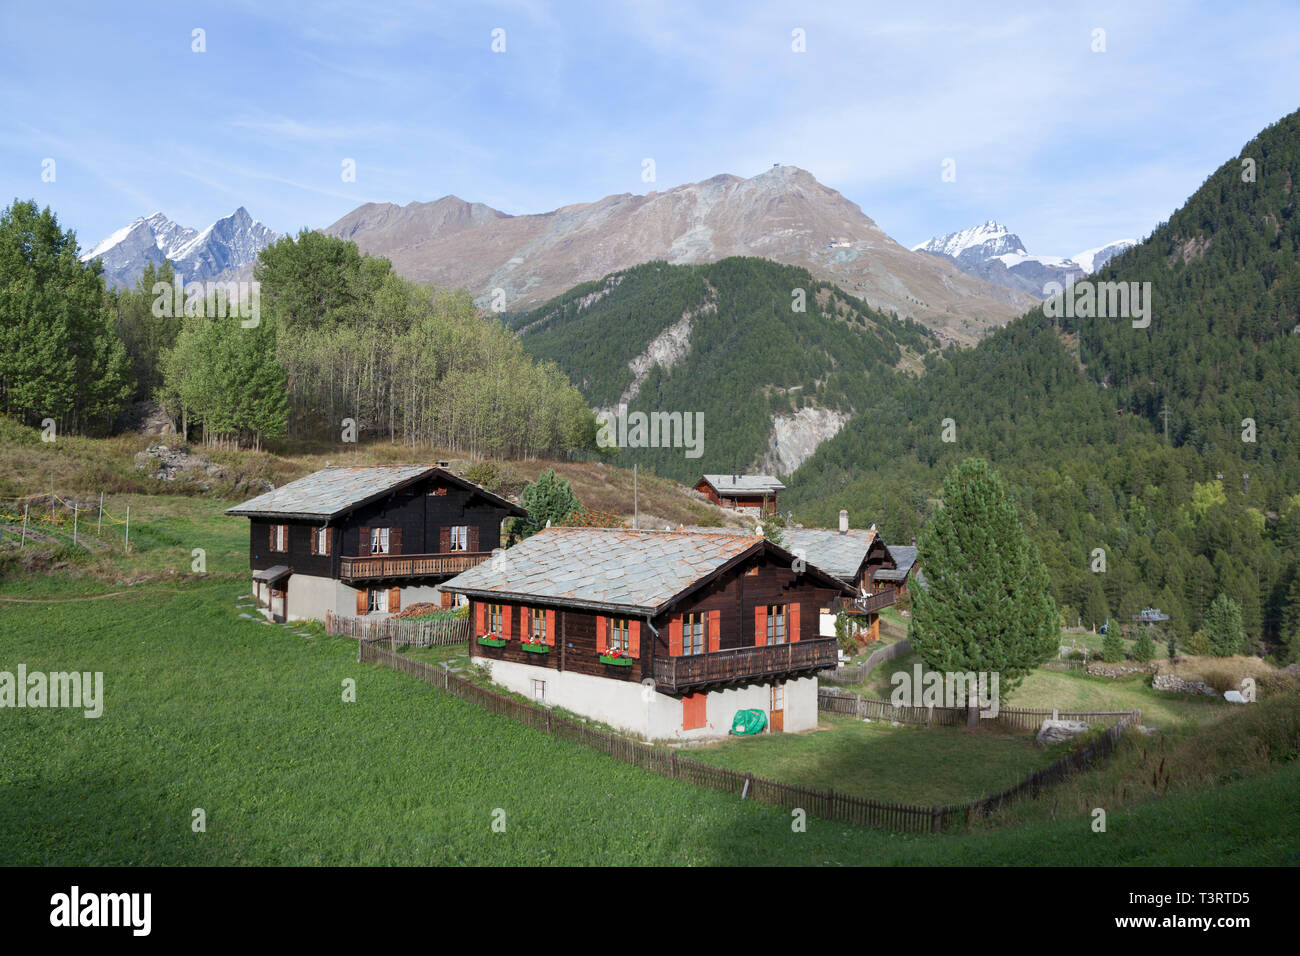 Swiss chalets in Gruben a village on the Haute Route. Stock Photo